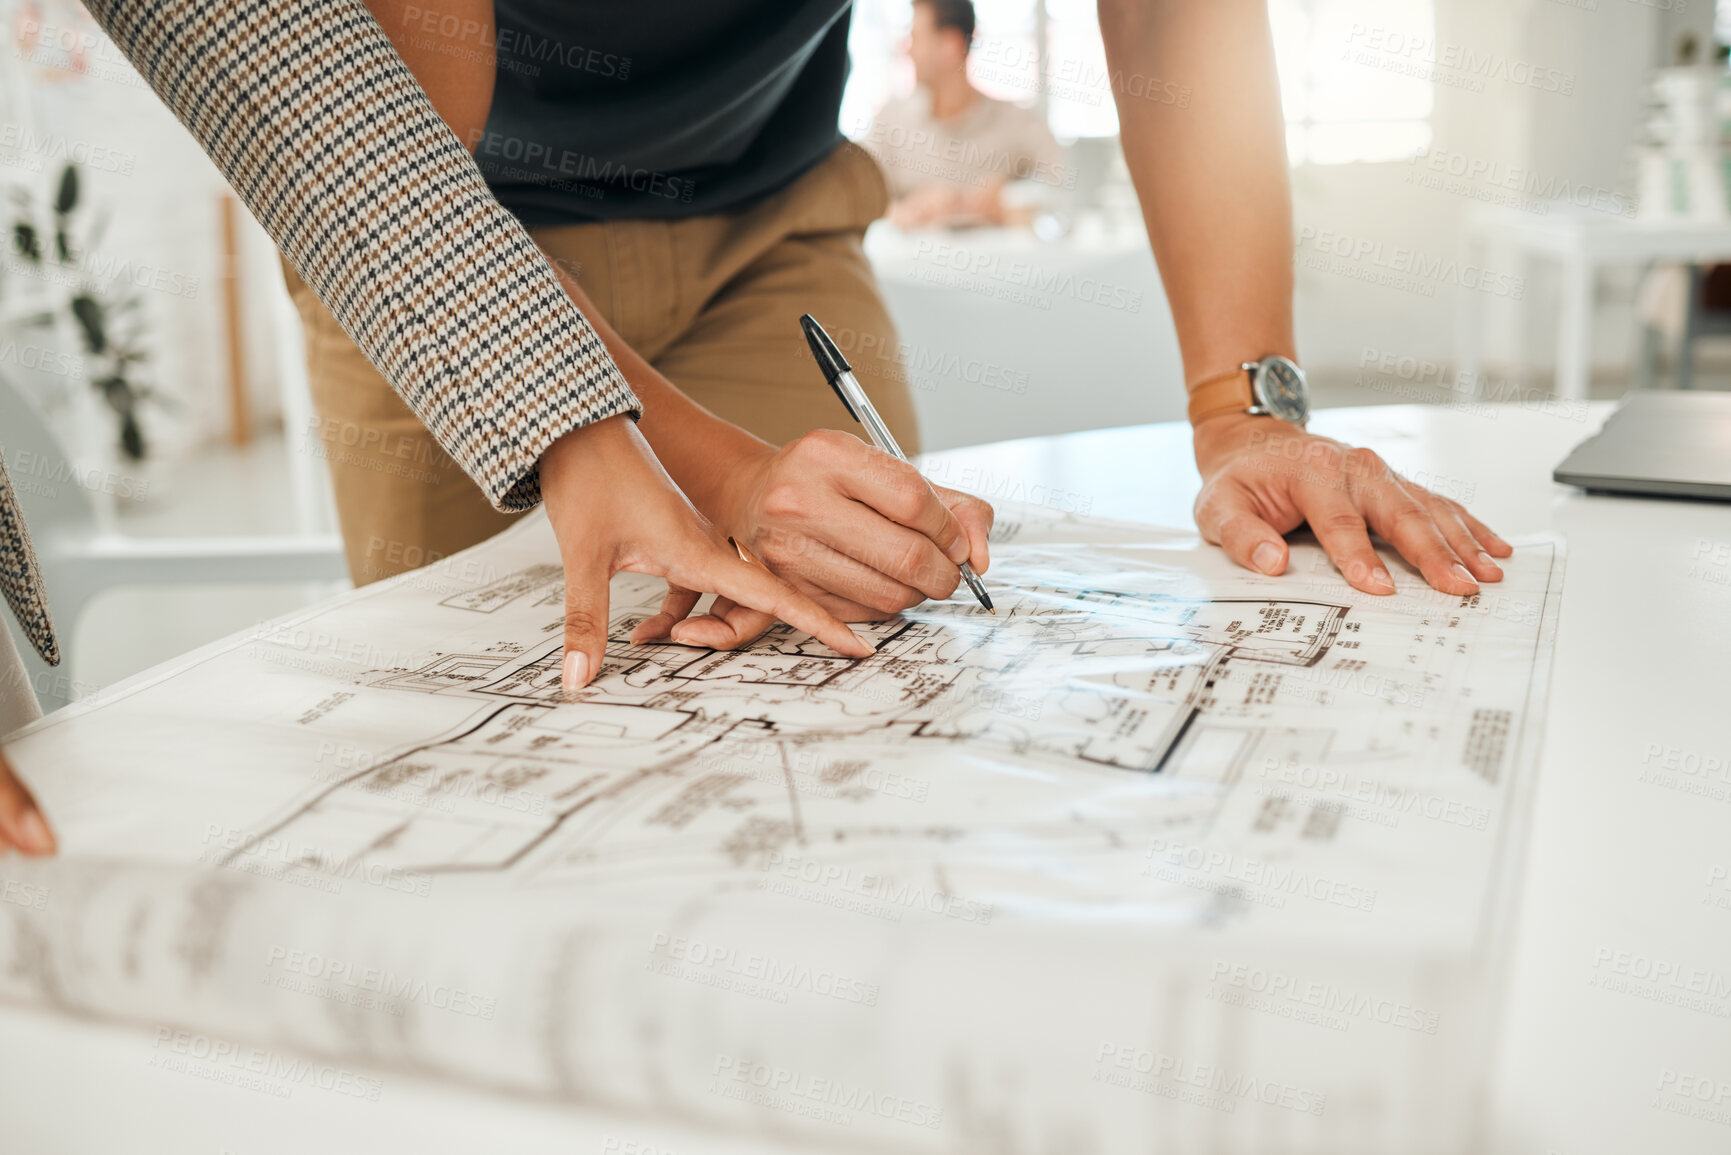 Buy stock photo Businesspeople working on building plan together. Hands of colleagues writing on a blueprint. Two architects collaborate on a blueprint. Closeup of engineers planning a building together.